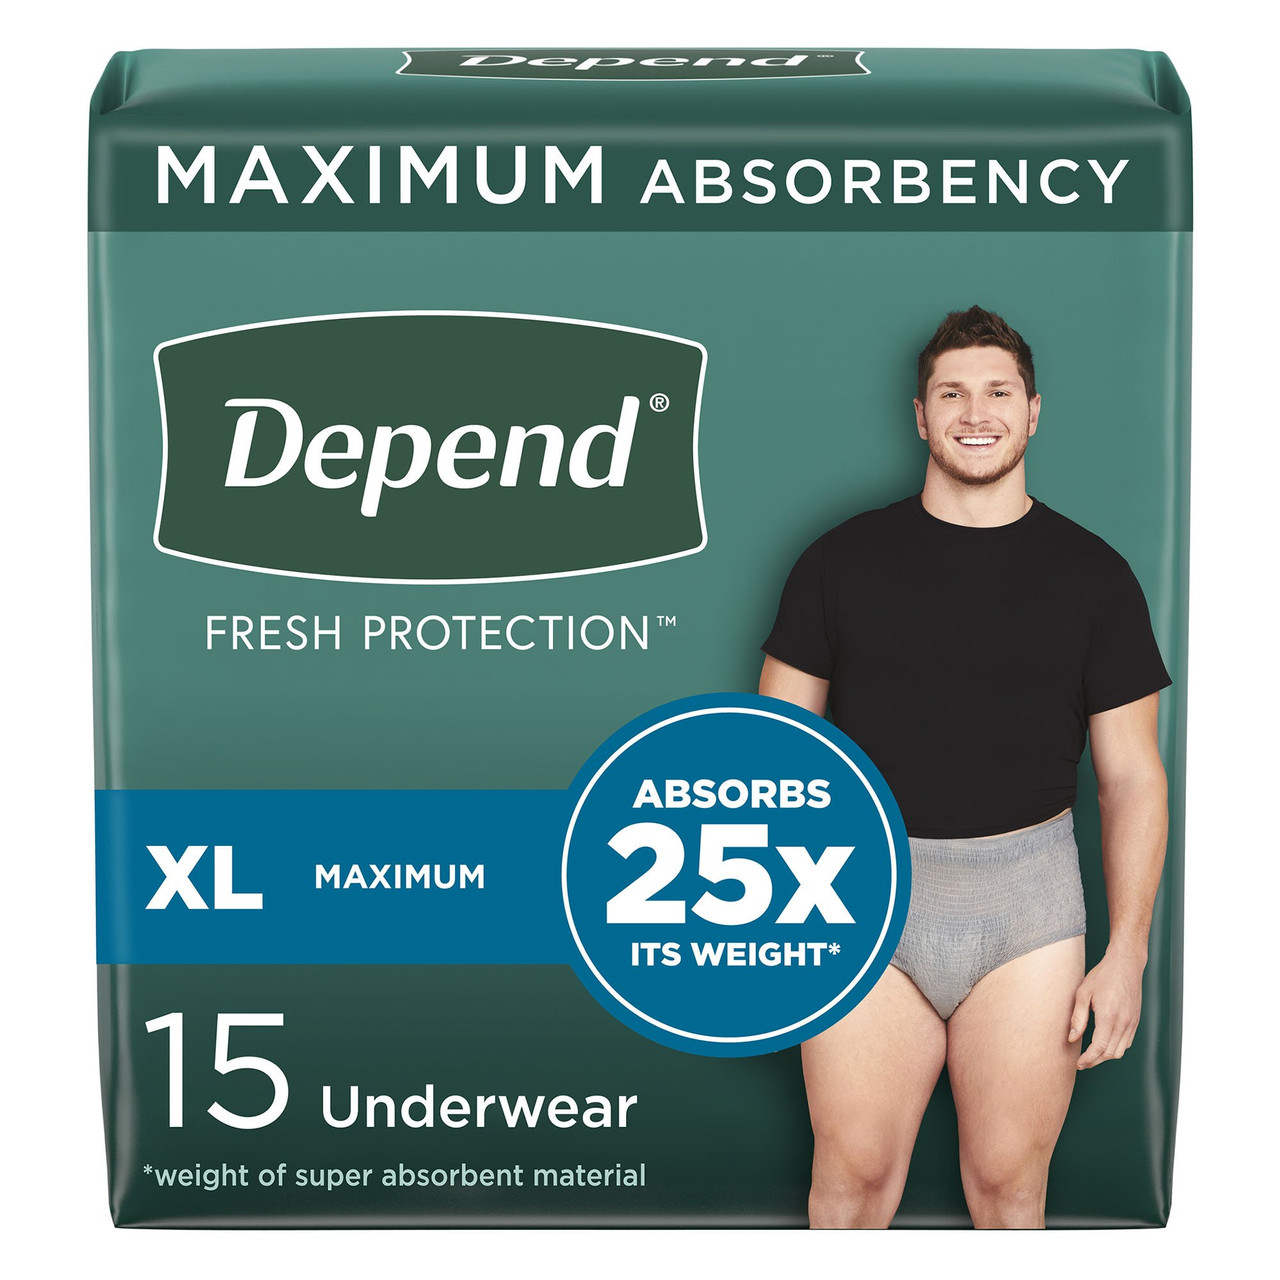 Depend Silhouette Incontinence Underwear for Women, Maximum Absorbency,  S/M, 12 Count(Pack of 4) - Care and Shop